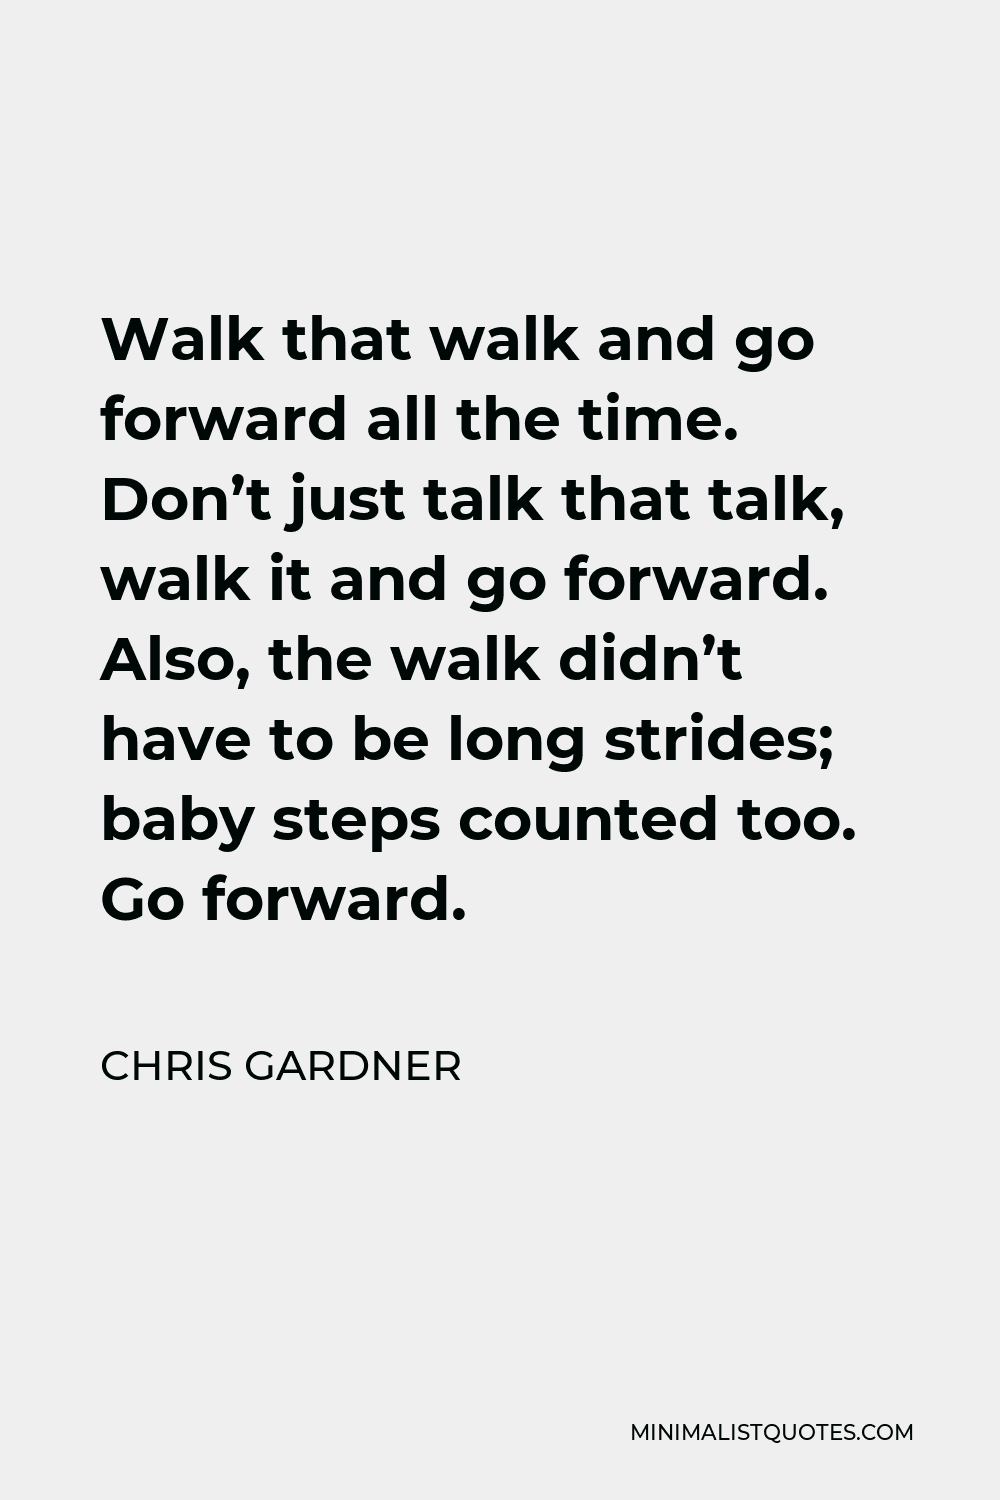 Chris Gardner Quote - Walk that walk and go forward all the time. Don’t just talk that talk, walk it and go forward. Also, the walk didn’t have to be long strides; baby steps counted too. Go forward.